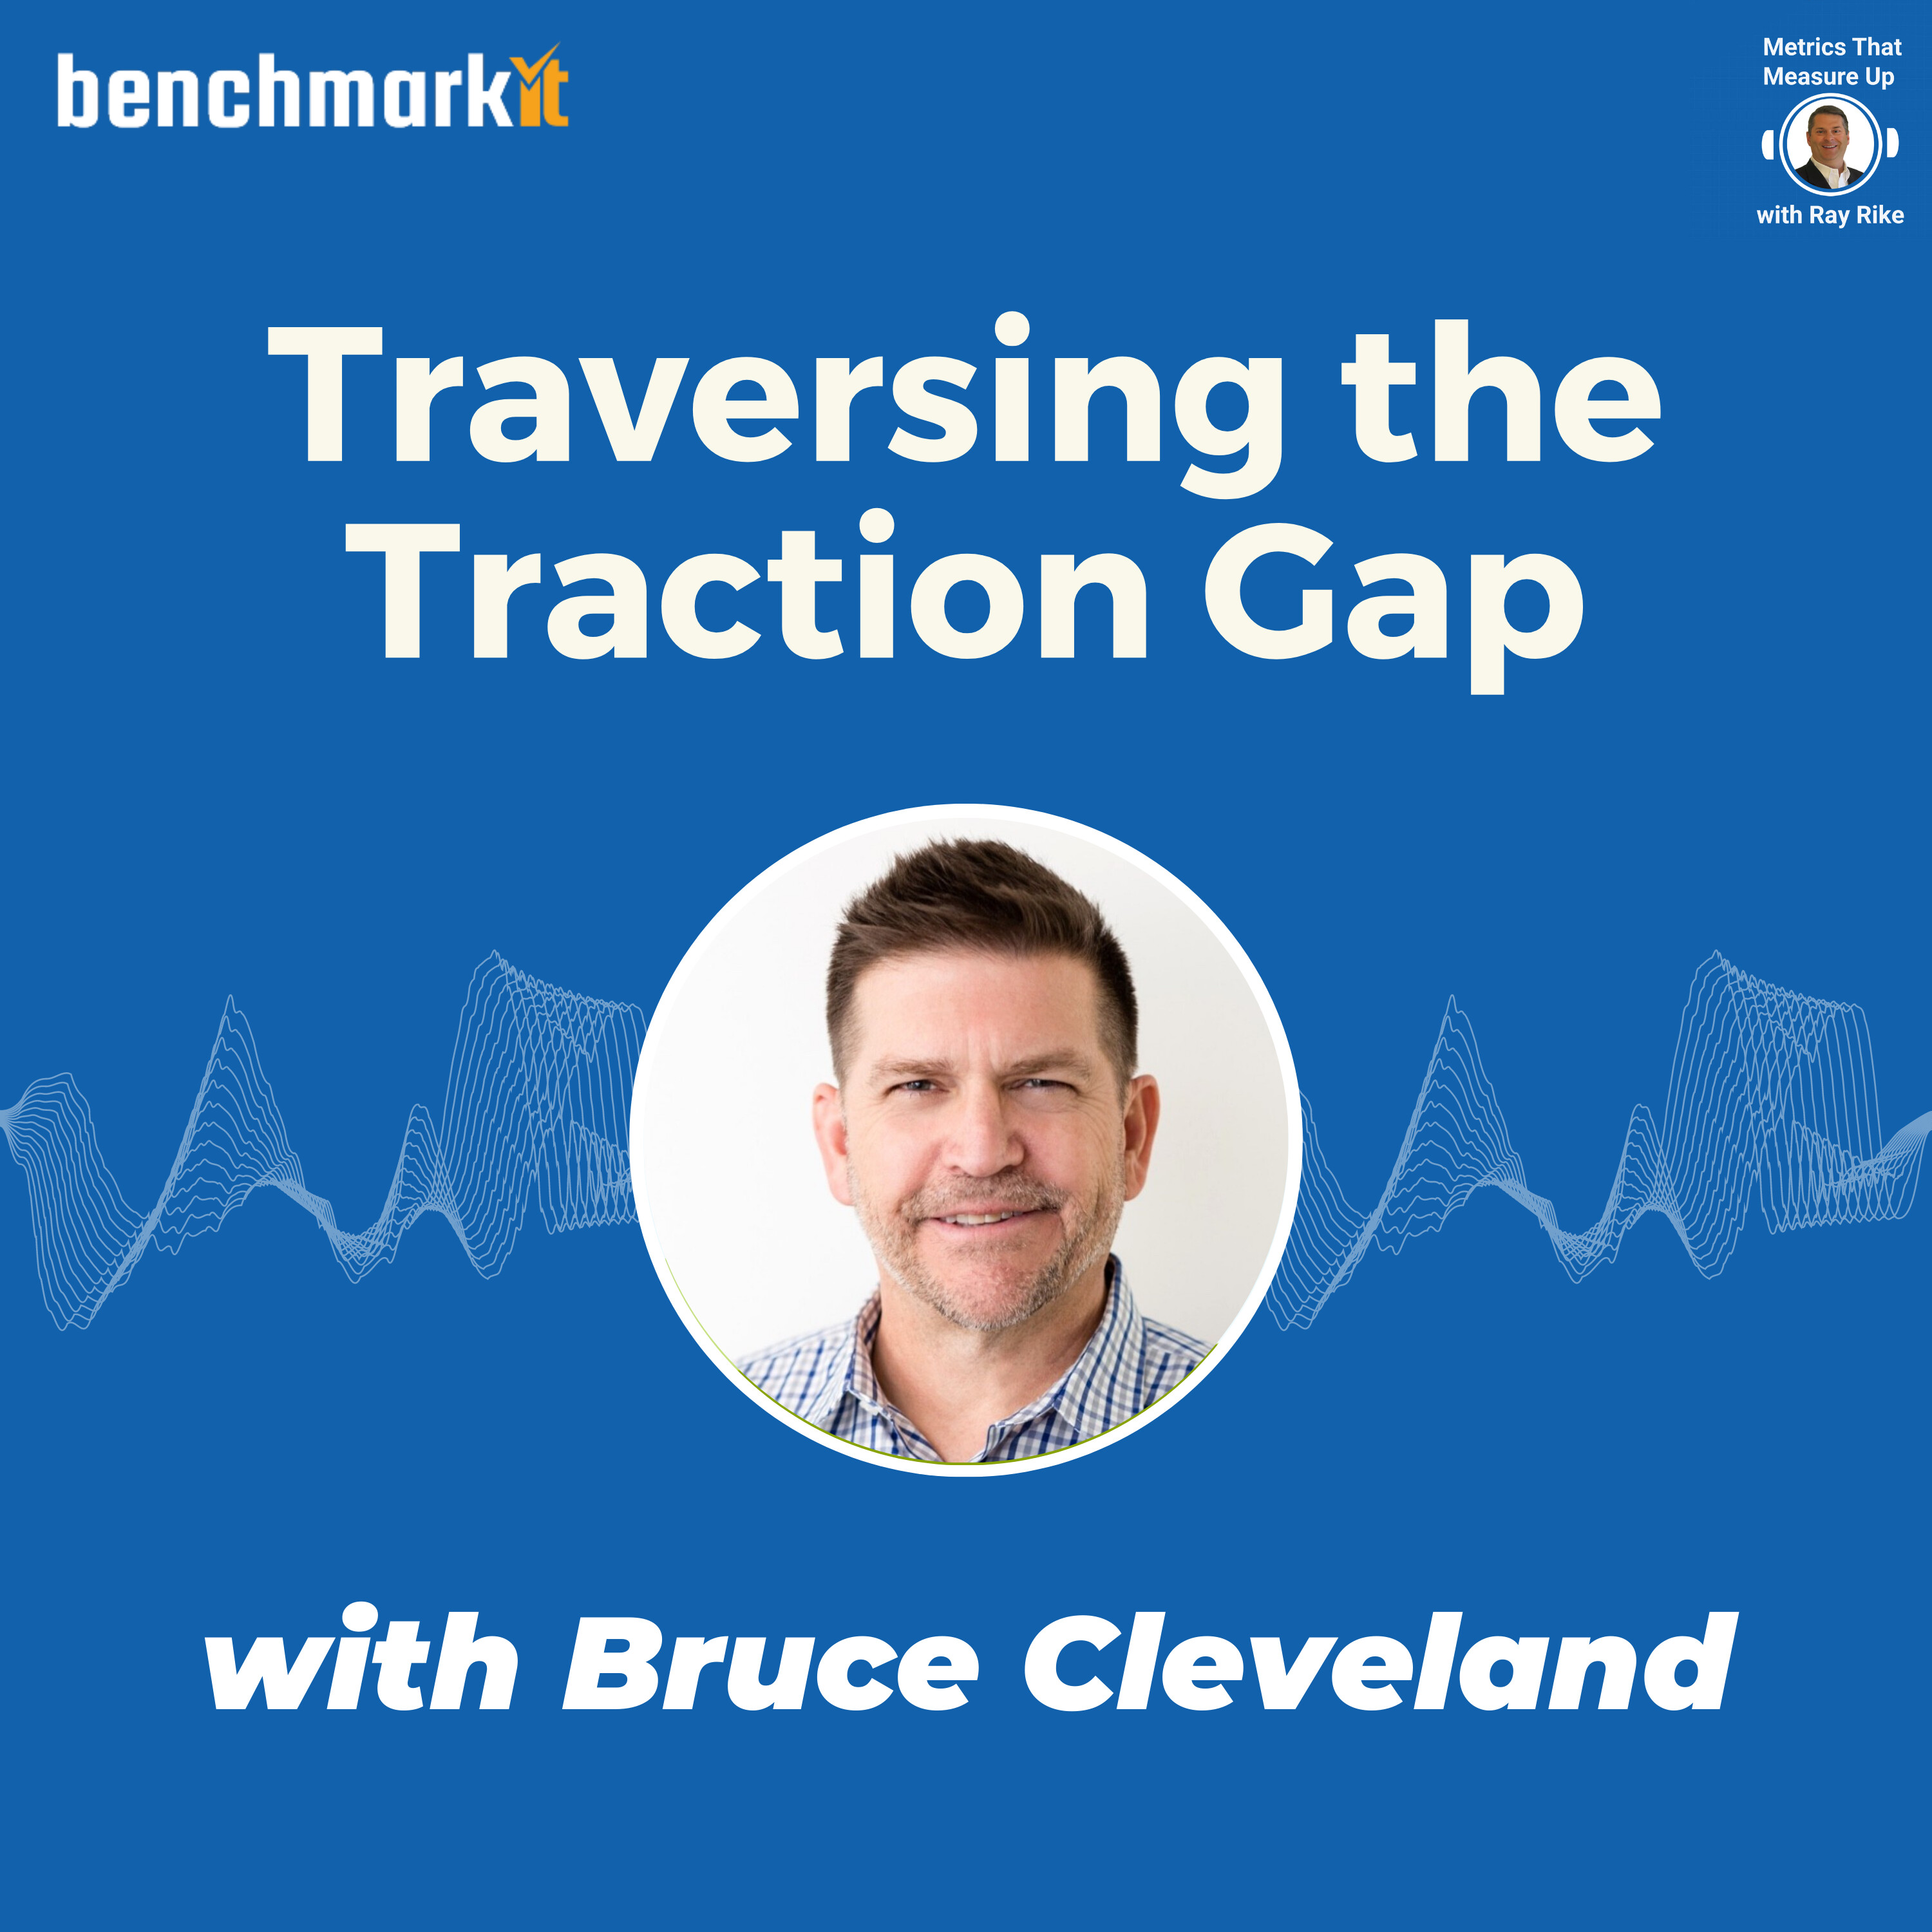 Traversing the Traction Gap Framework - with Bruce Cleveland